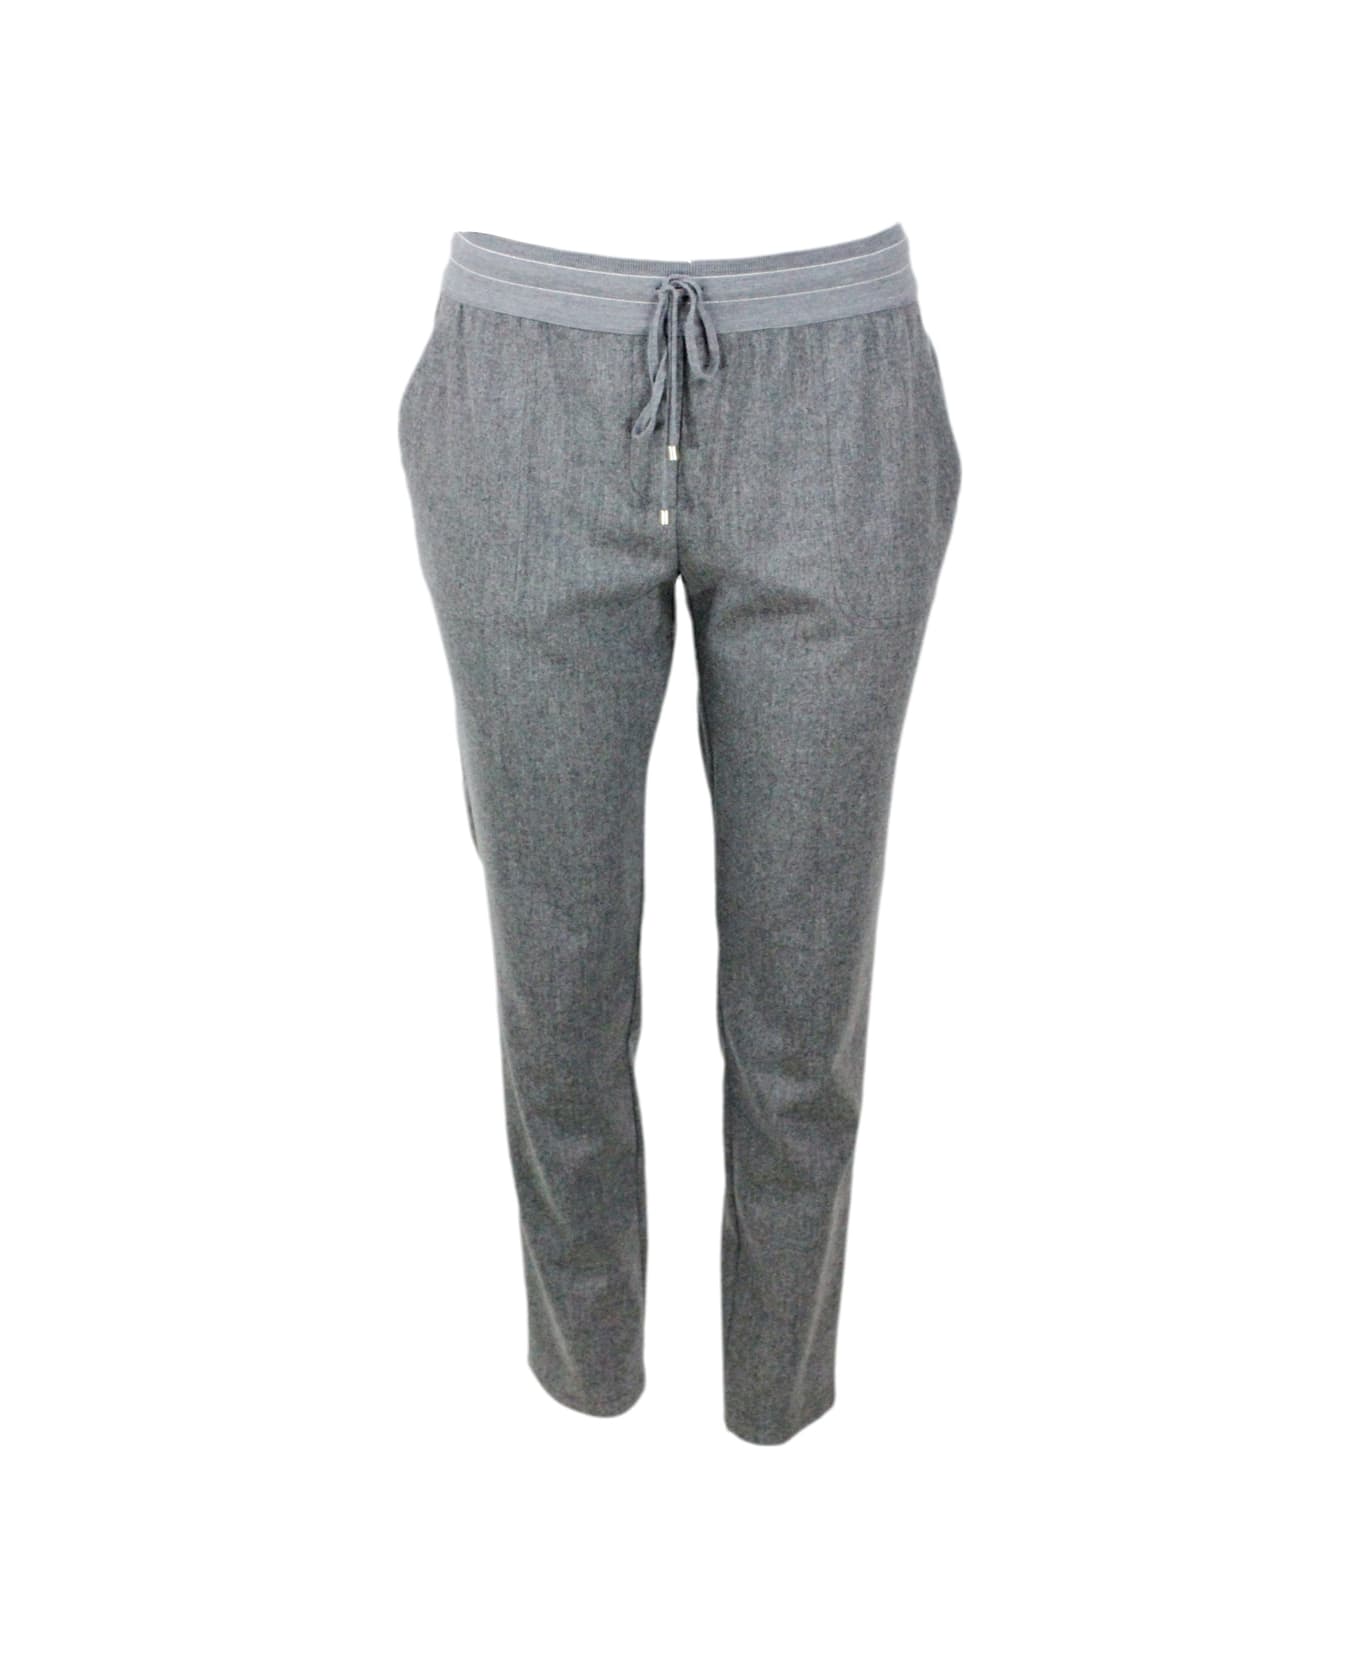 Lorena Antoniazzi Jogging Trousers With Drawstring And Elastic Waist In Very Soft Stretch Wool With Welt Pockets - Grey